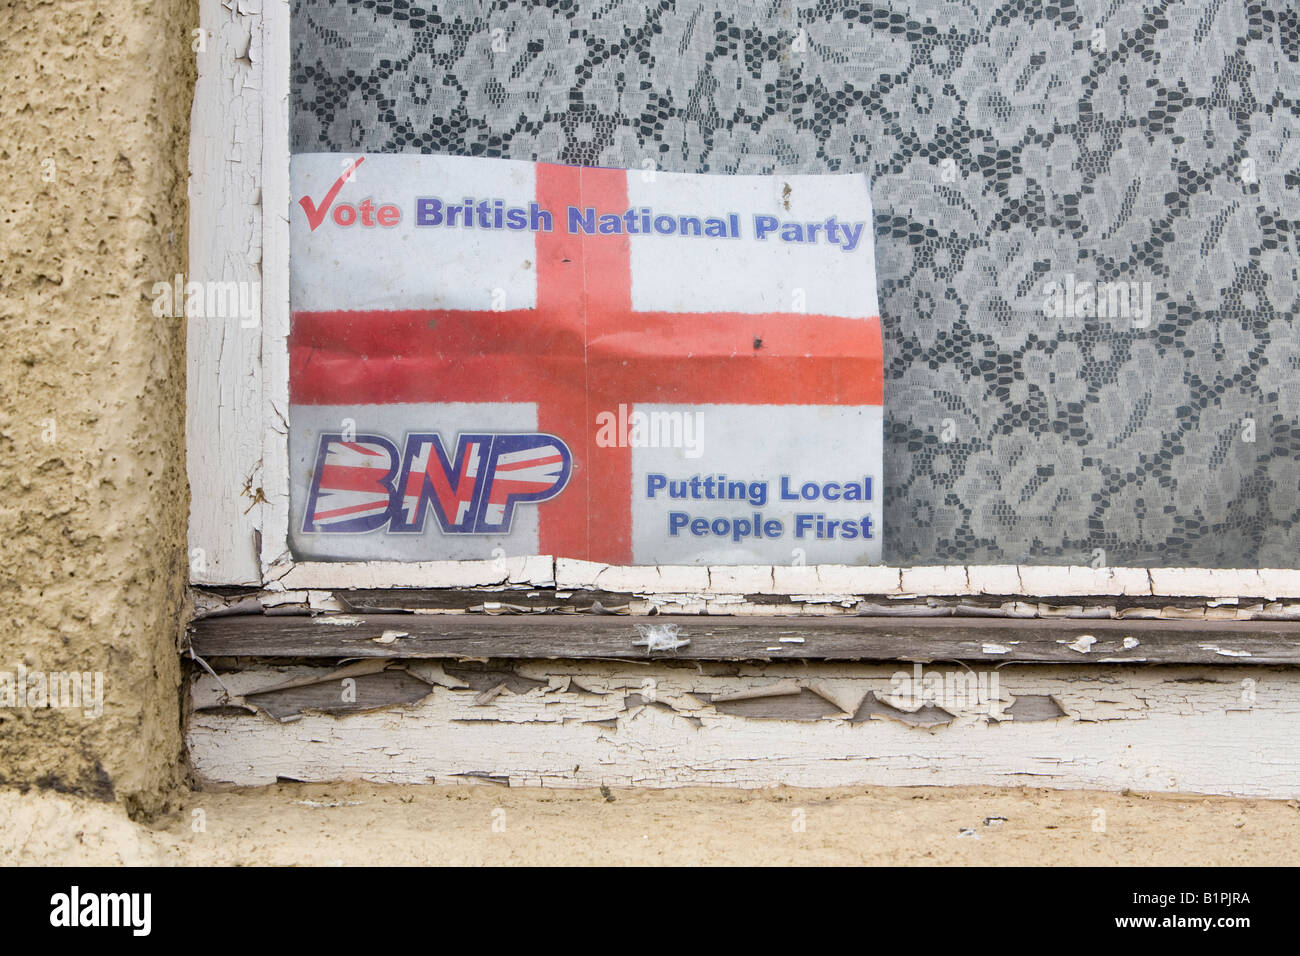 A poster for the BNP British National Party in Redcar Teeside UK Stock Photo